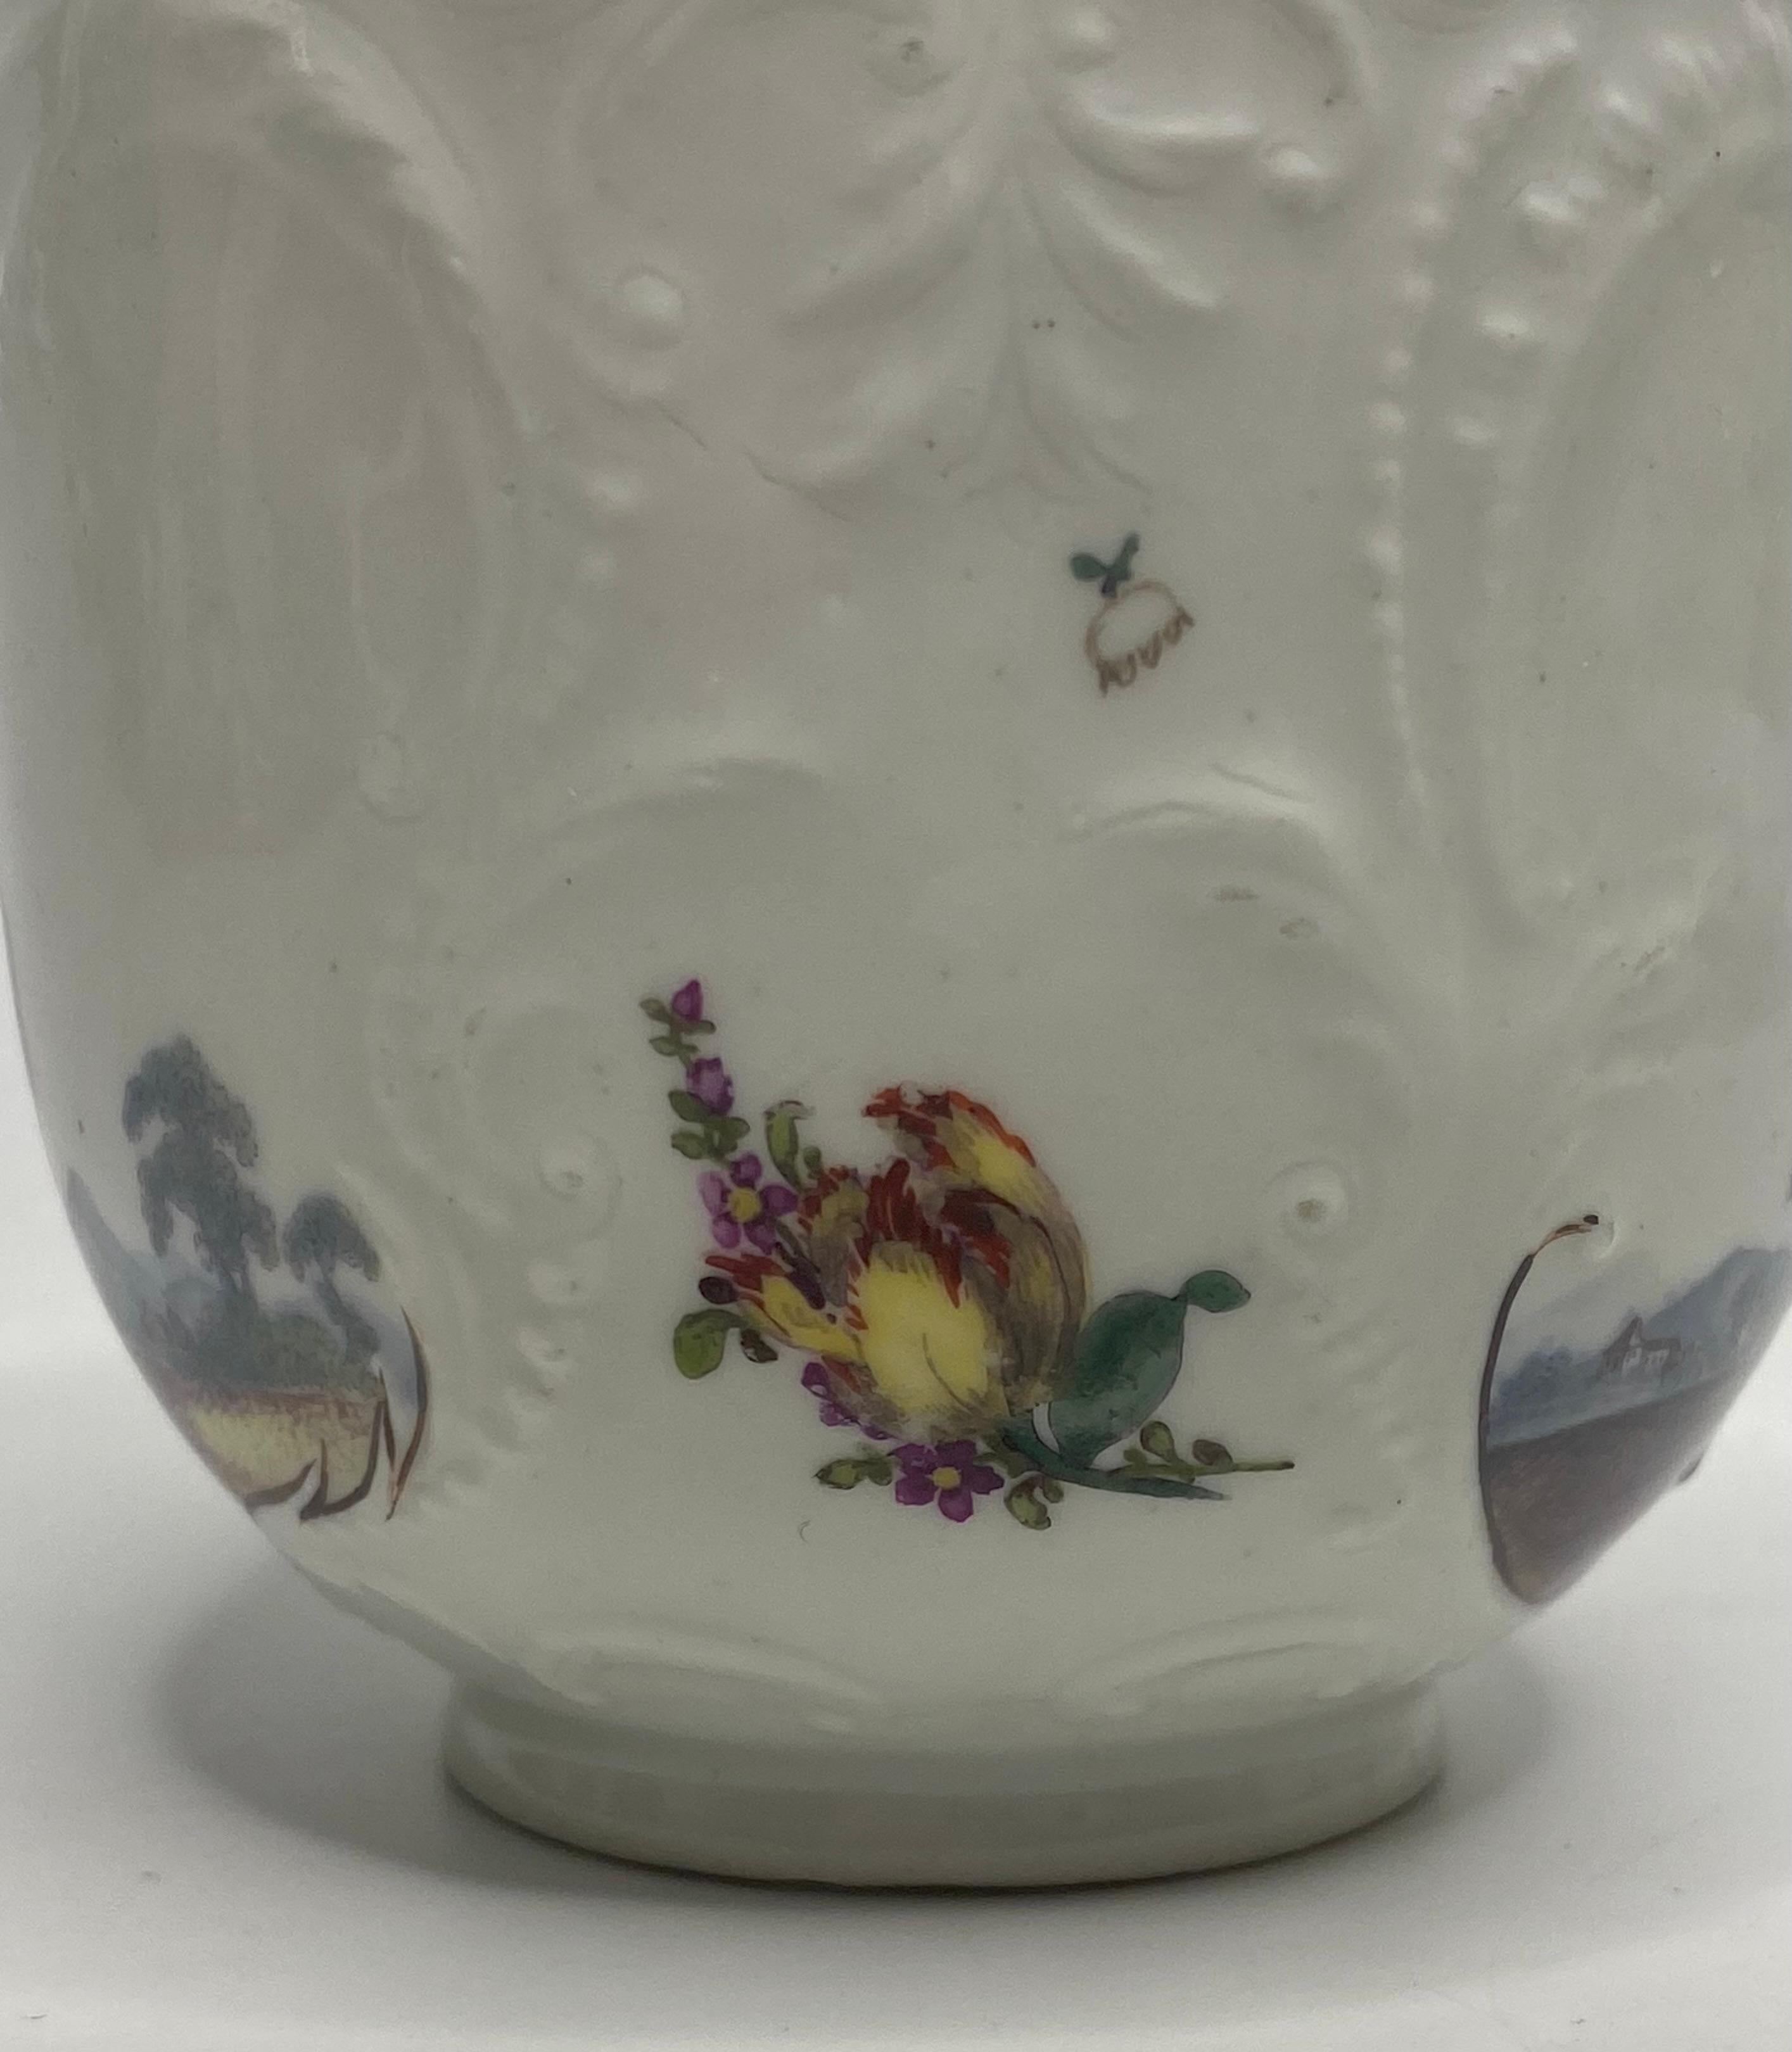 Meissen porcelain cup and saucer, c. 1740. 4